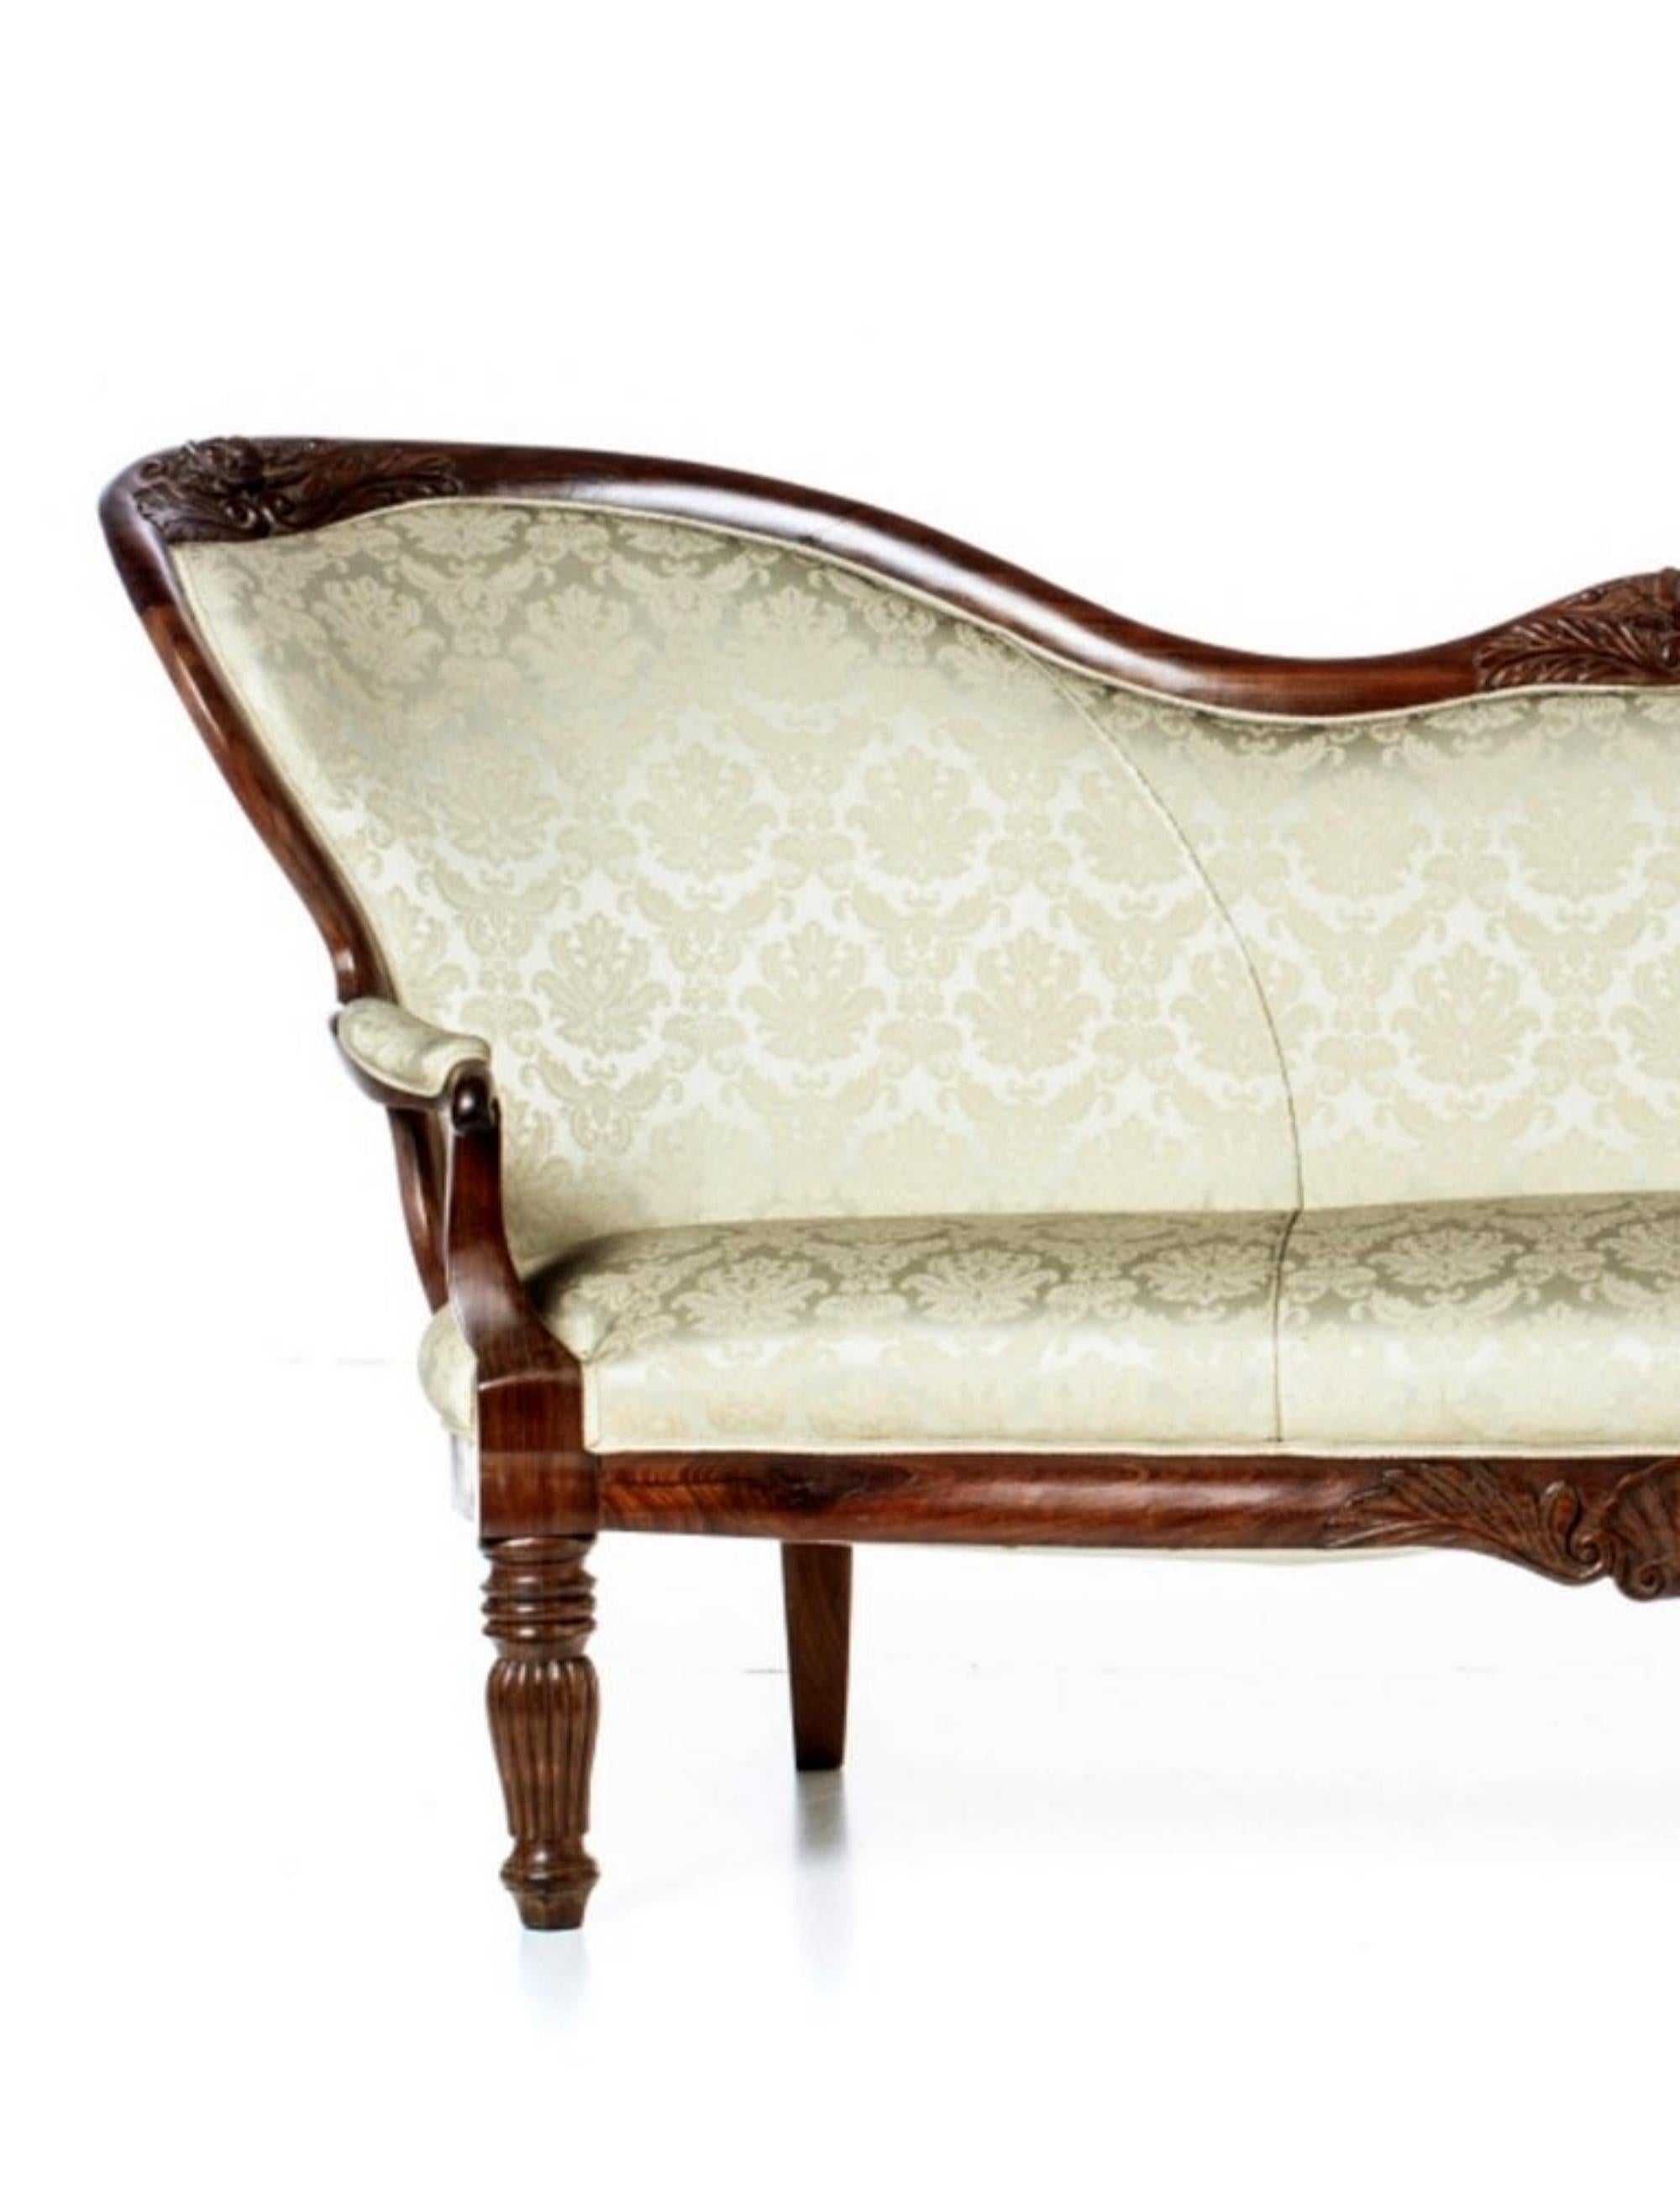 romantic canape

French, 19th century in Oilwood.
Upholstered seat and back, decorated with floral motifs.
Usage signs.
Dimensions: 104 x 235 x 64 cm
good conditions